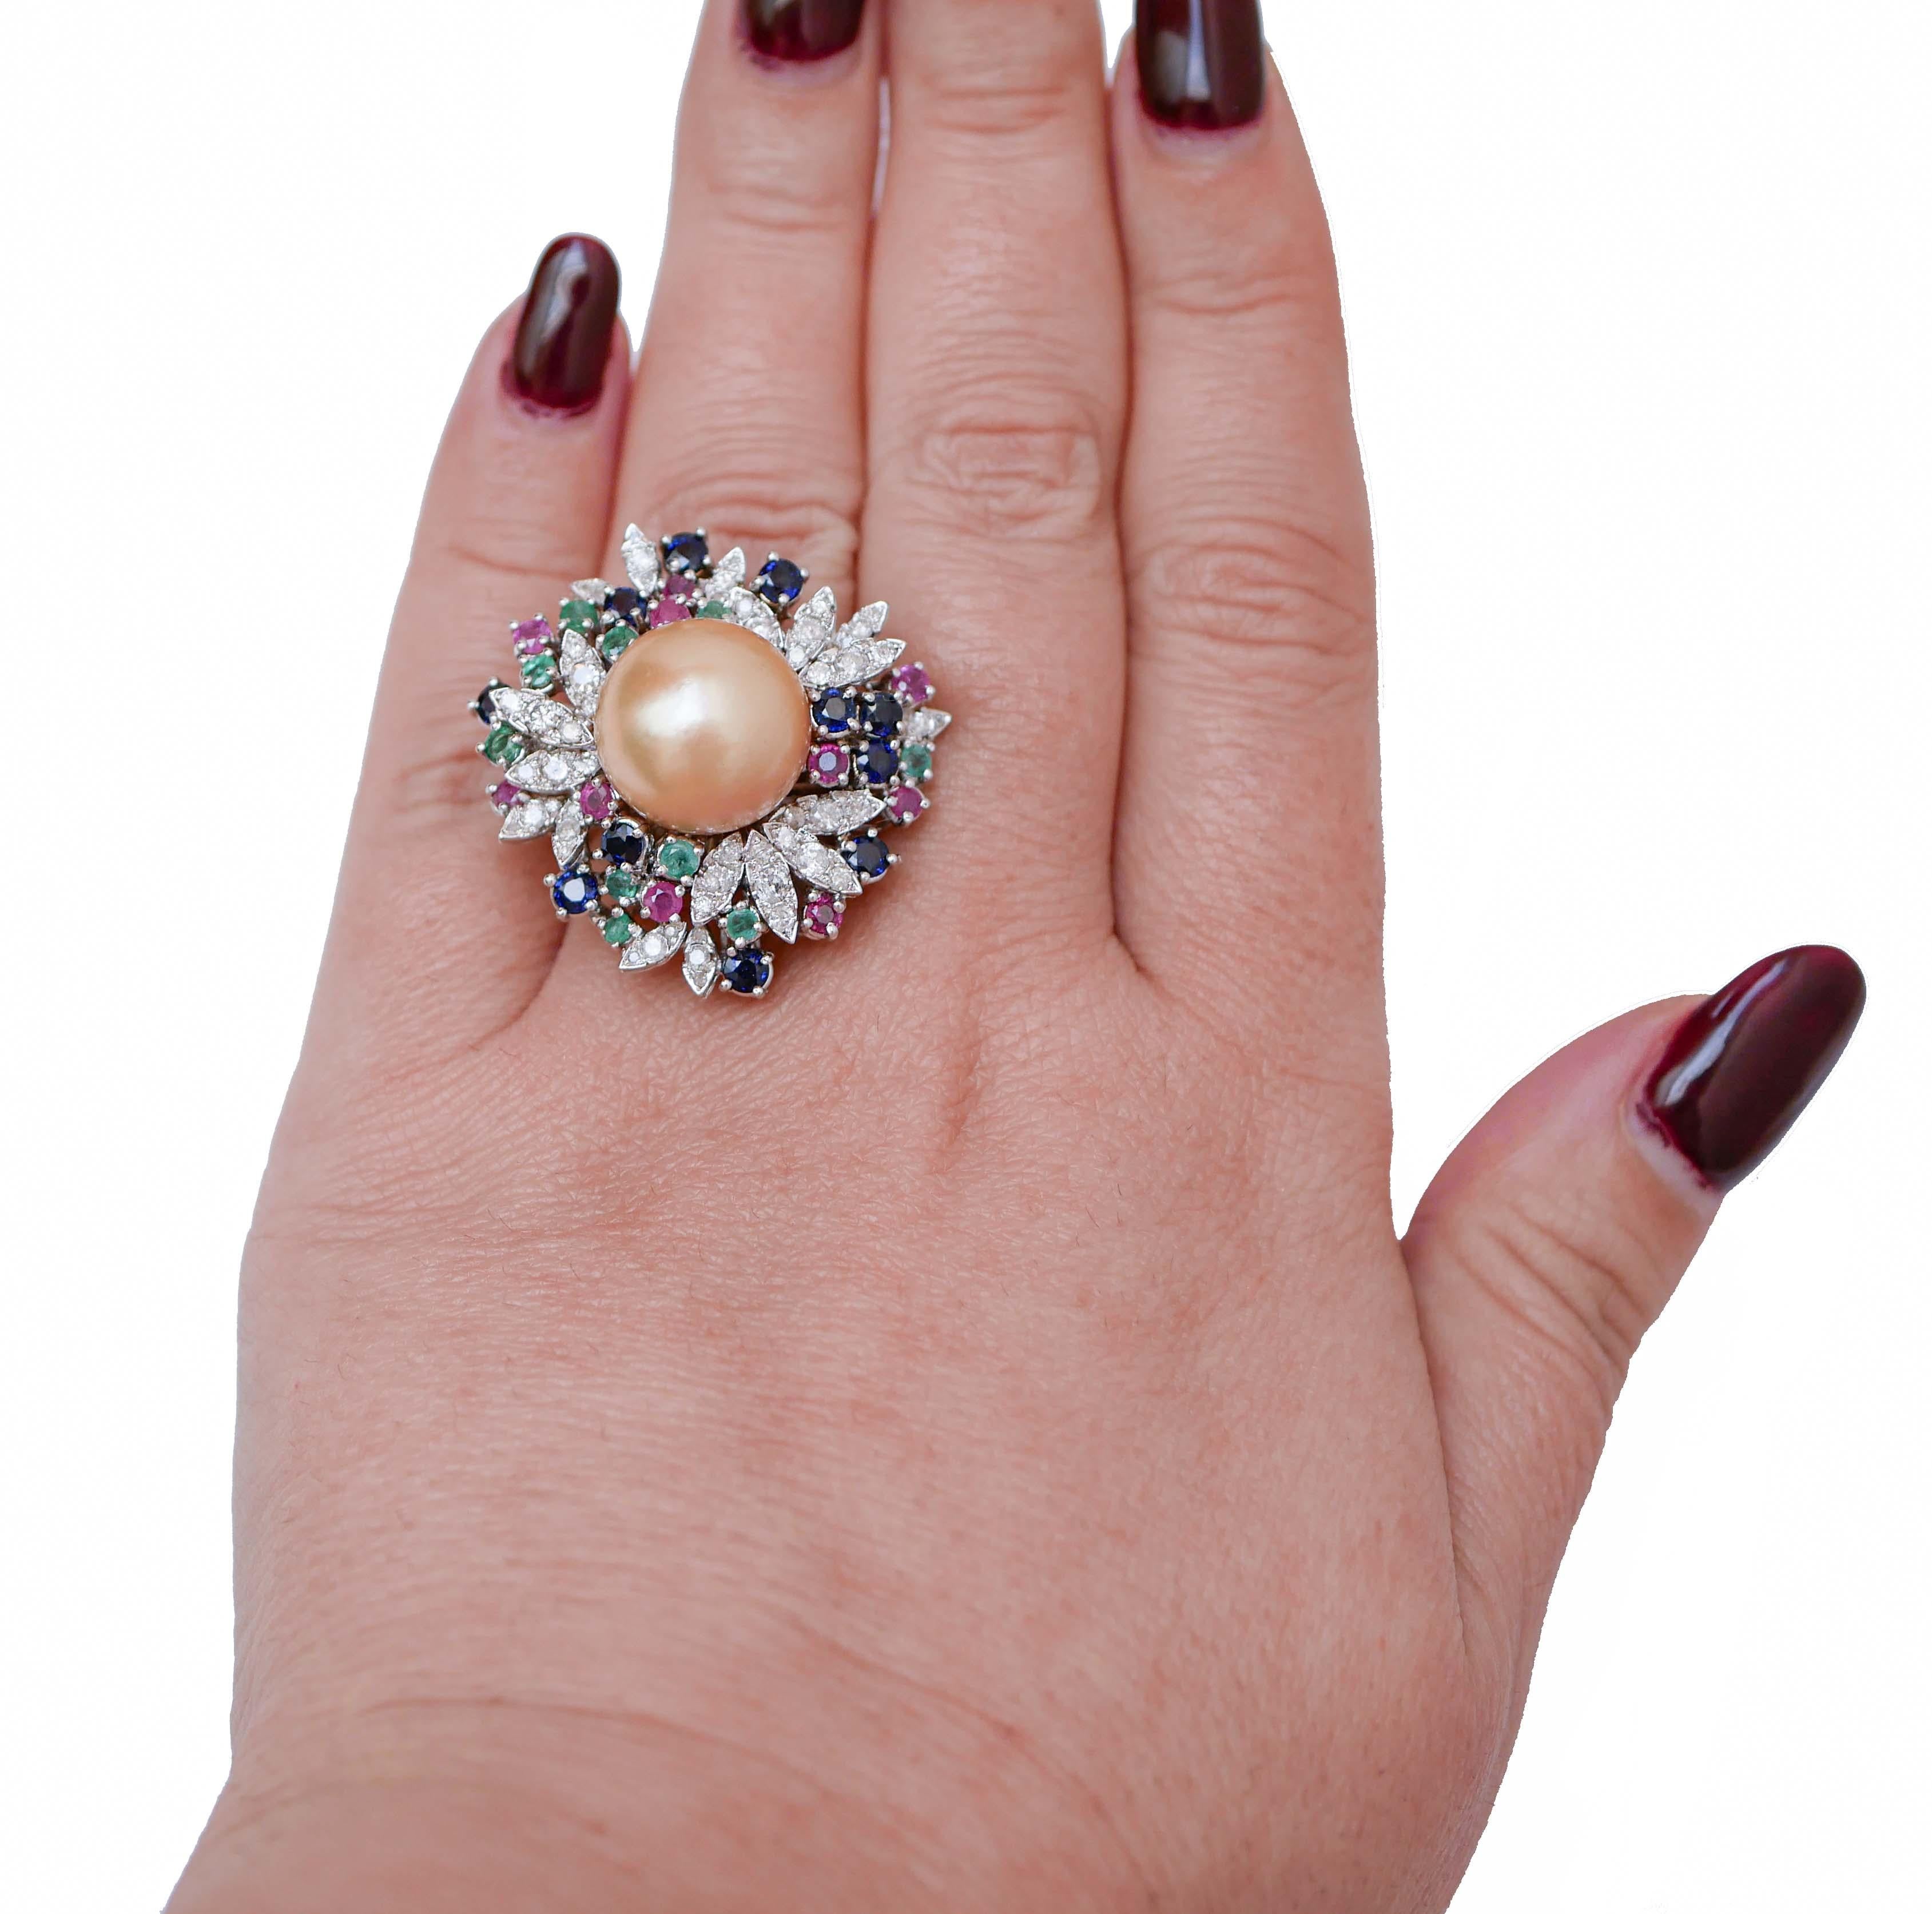 Mixed Cut Pearl, Sapphires, Diamonds, Emeralds, Rubies, 14 Karat White Gold Ring.  For Sale